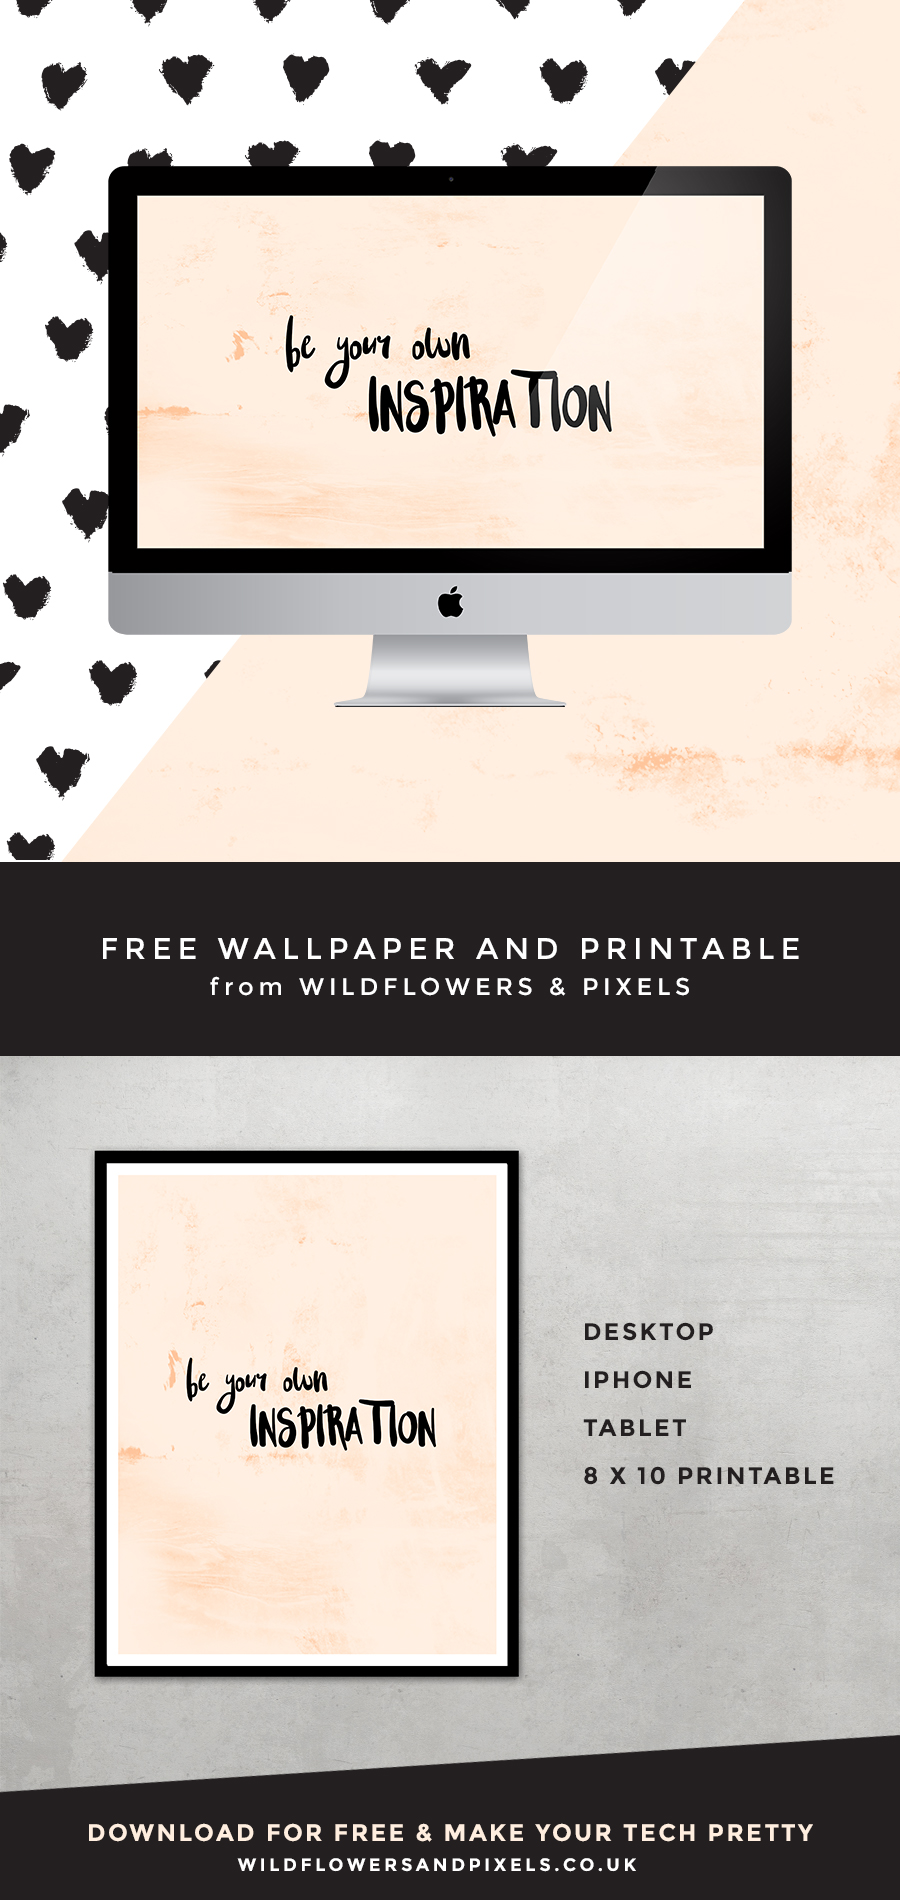 Be Your Own Inspiration Free Wallpaper And Printable. Download To Make Your Walls And Tech Pretty And Inspiring.